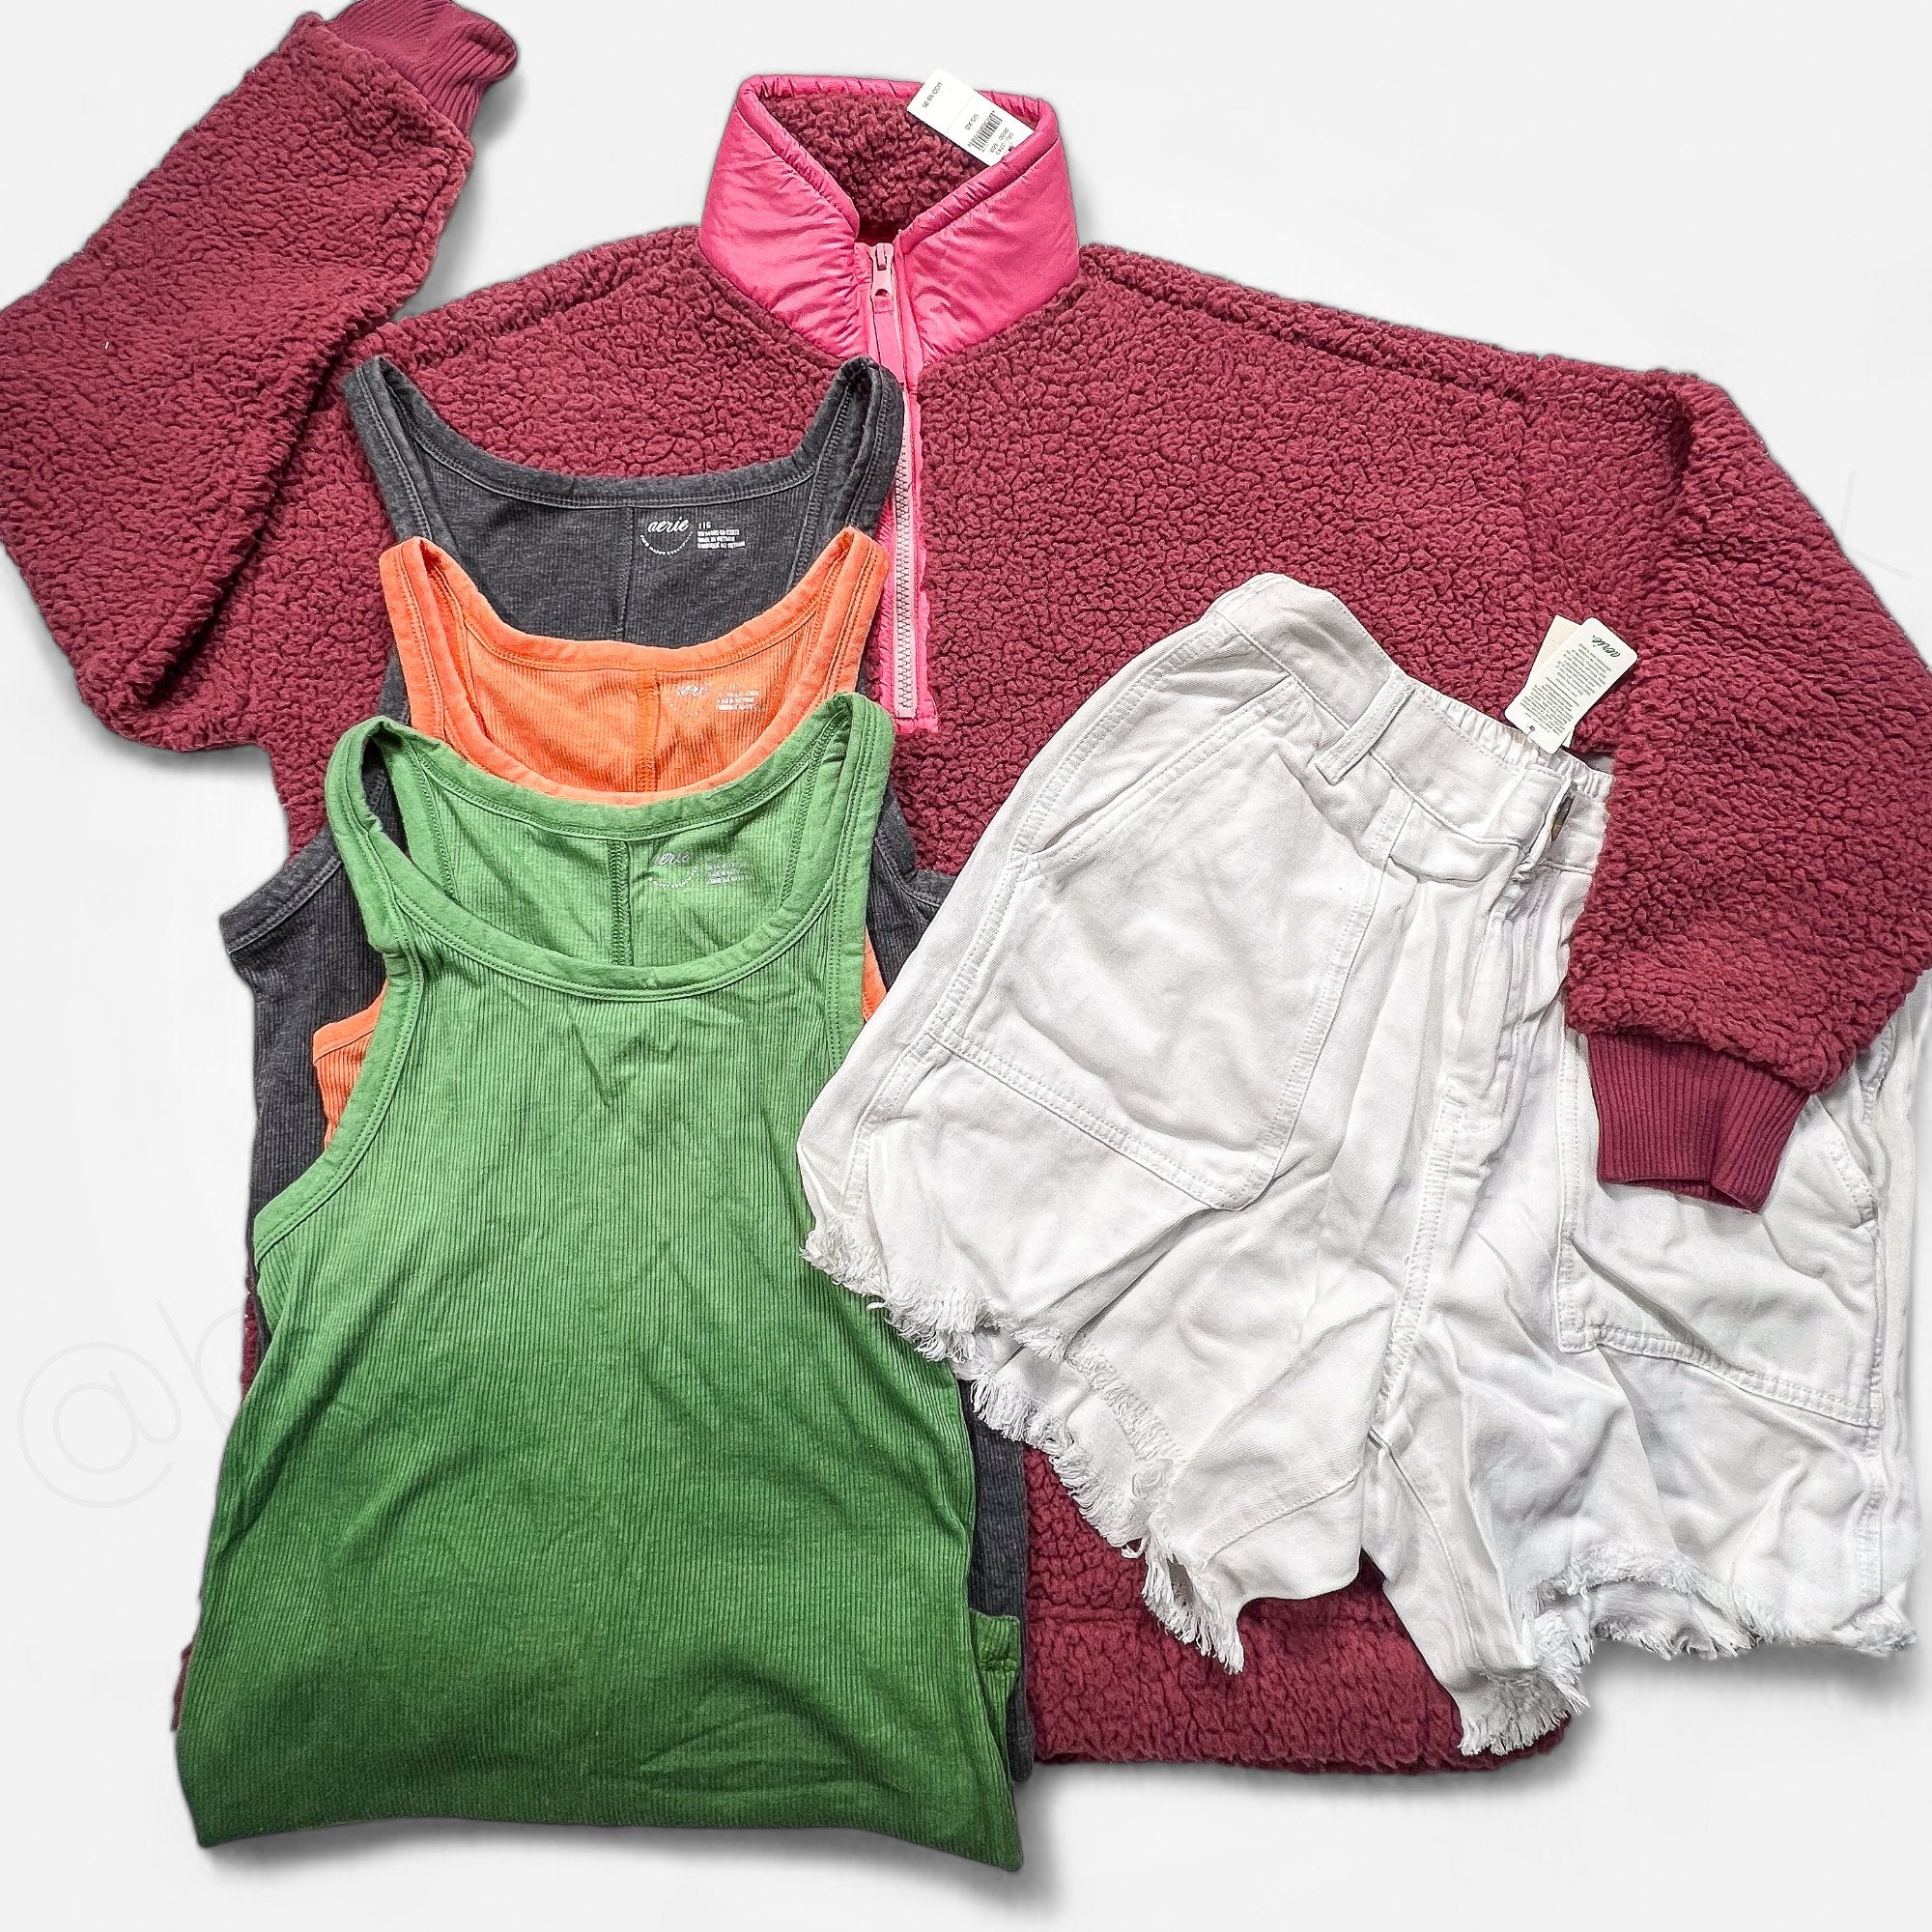 Aerie + American Eagle Assorted Women's New Wholesale Clothing - Boutique by the Box Wholesale for Resellers